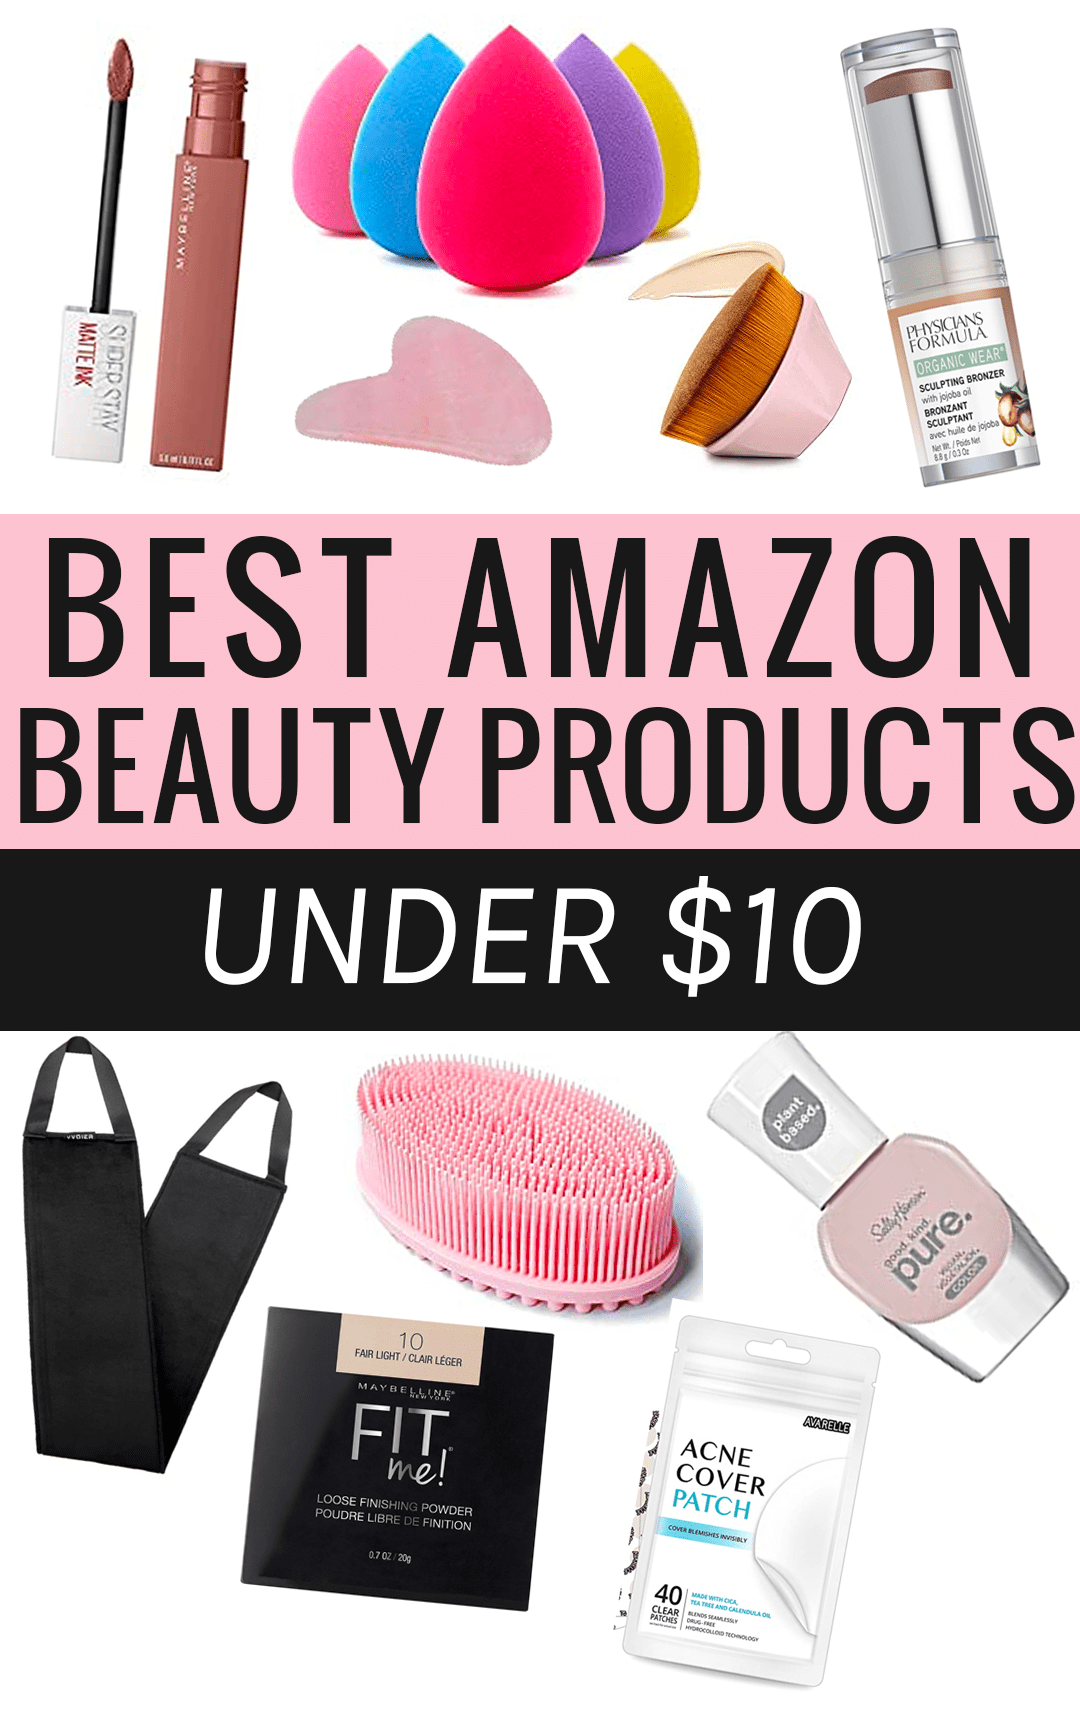 Products UNDER $1 Each (Food, Beauty, & More)